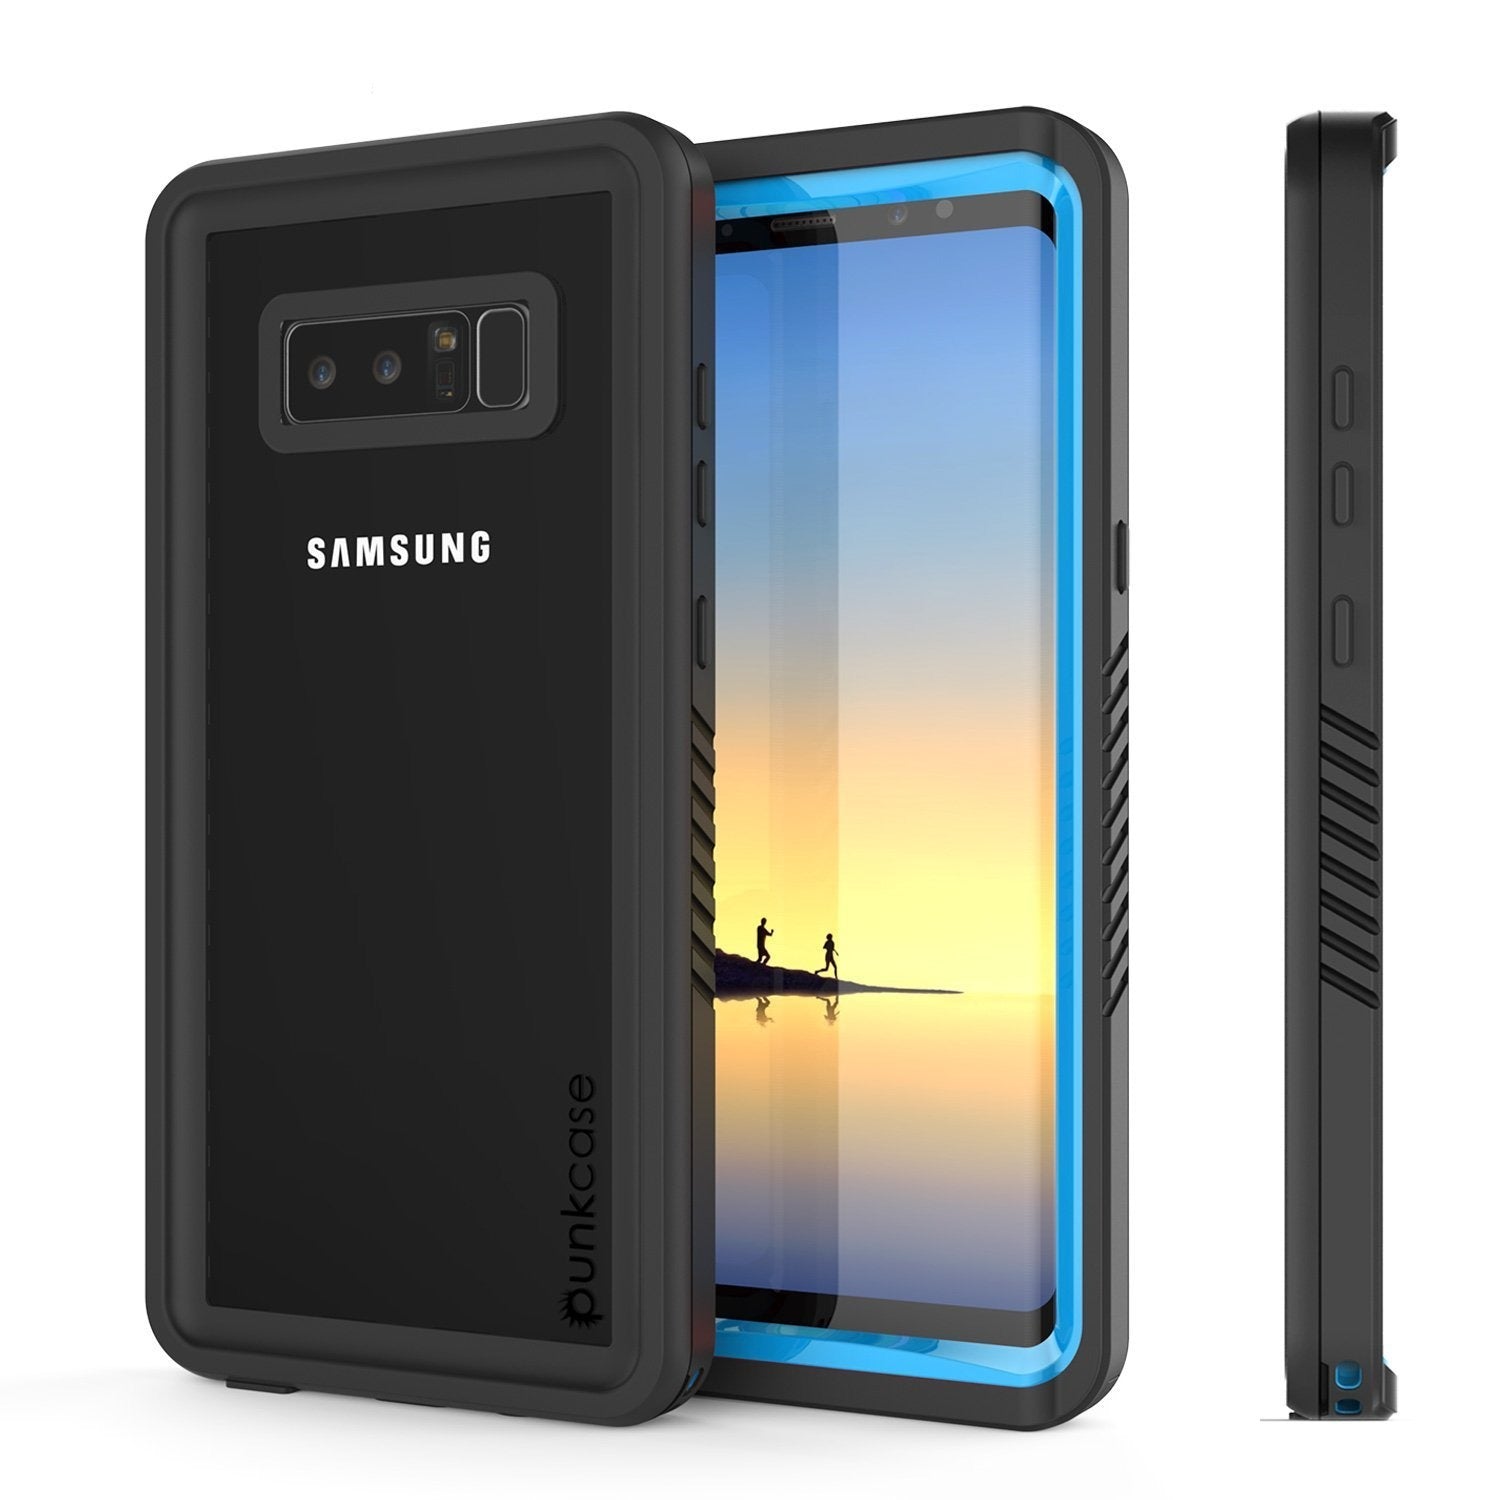 Galaxy Note 8 Waterproof Case, Punkcase [Extreme Series] [Light Blue]